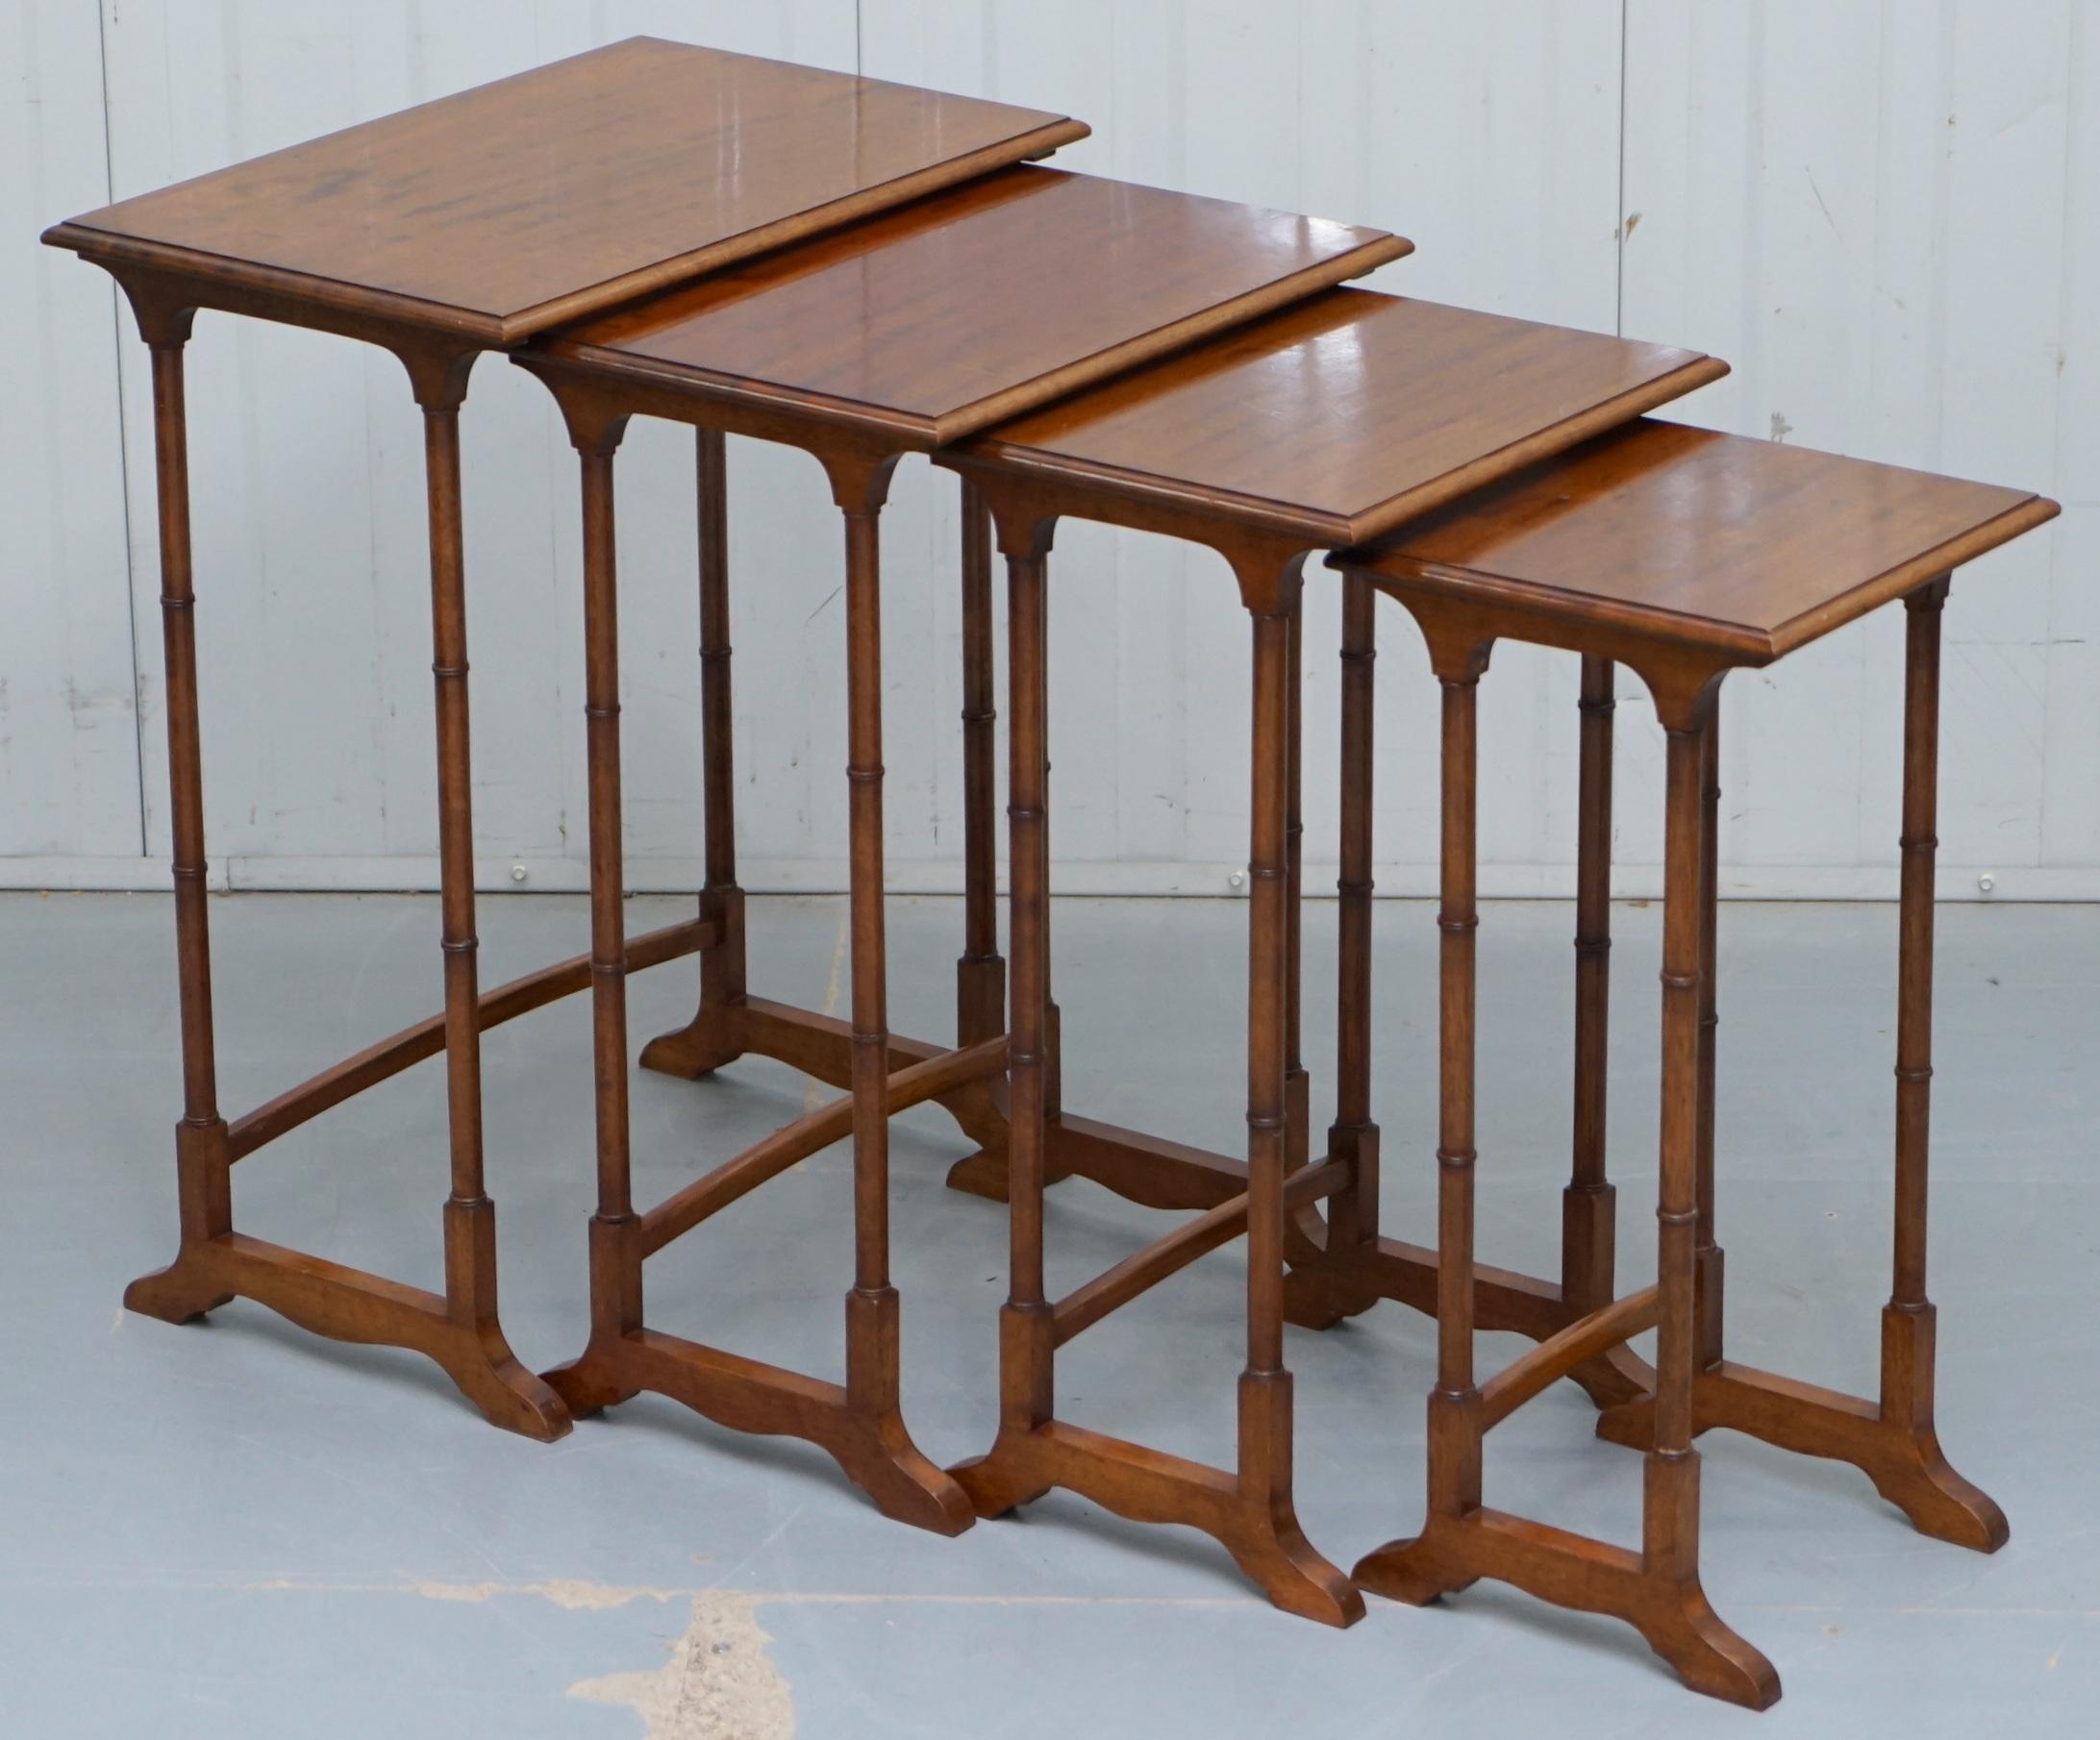 We are delighted to offer for sale this lovely original set of four Georgian Mahogany nesting tables with famboo legs

A very good looking and quintessentially English nest of tables, made with glorious golden mahogany, the legs are carved in the